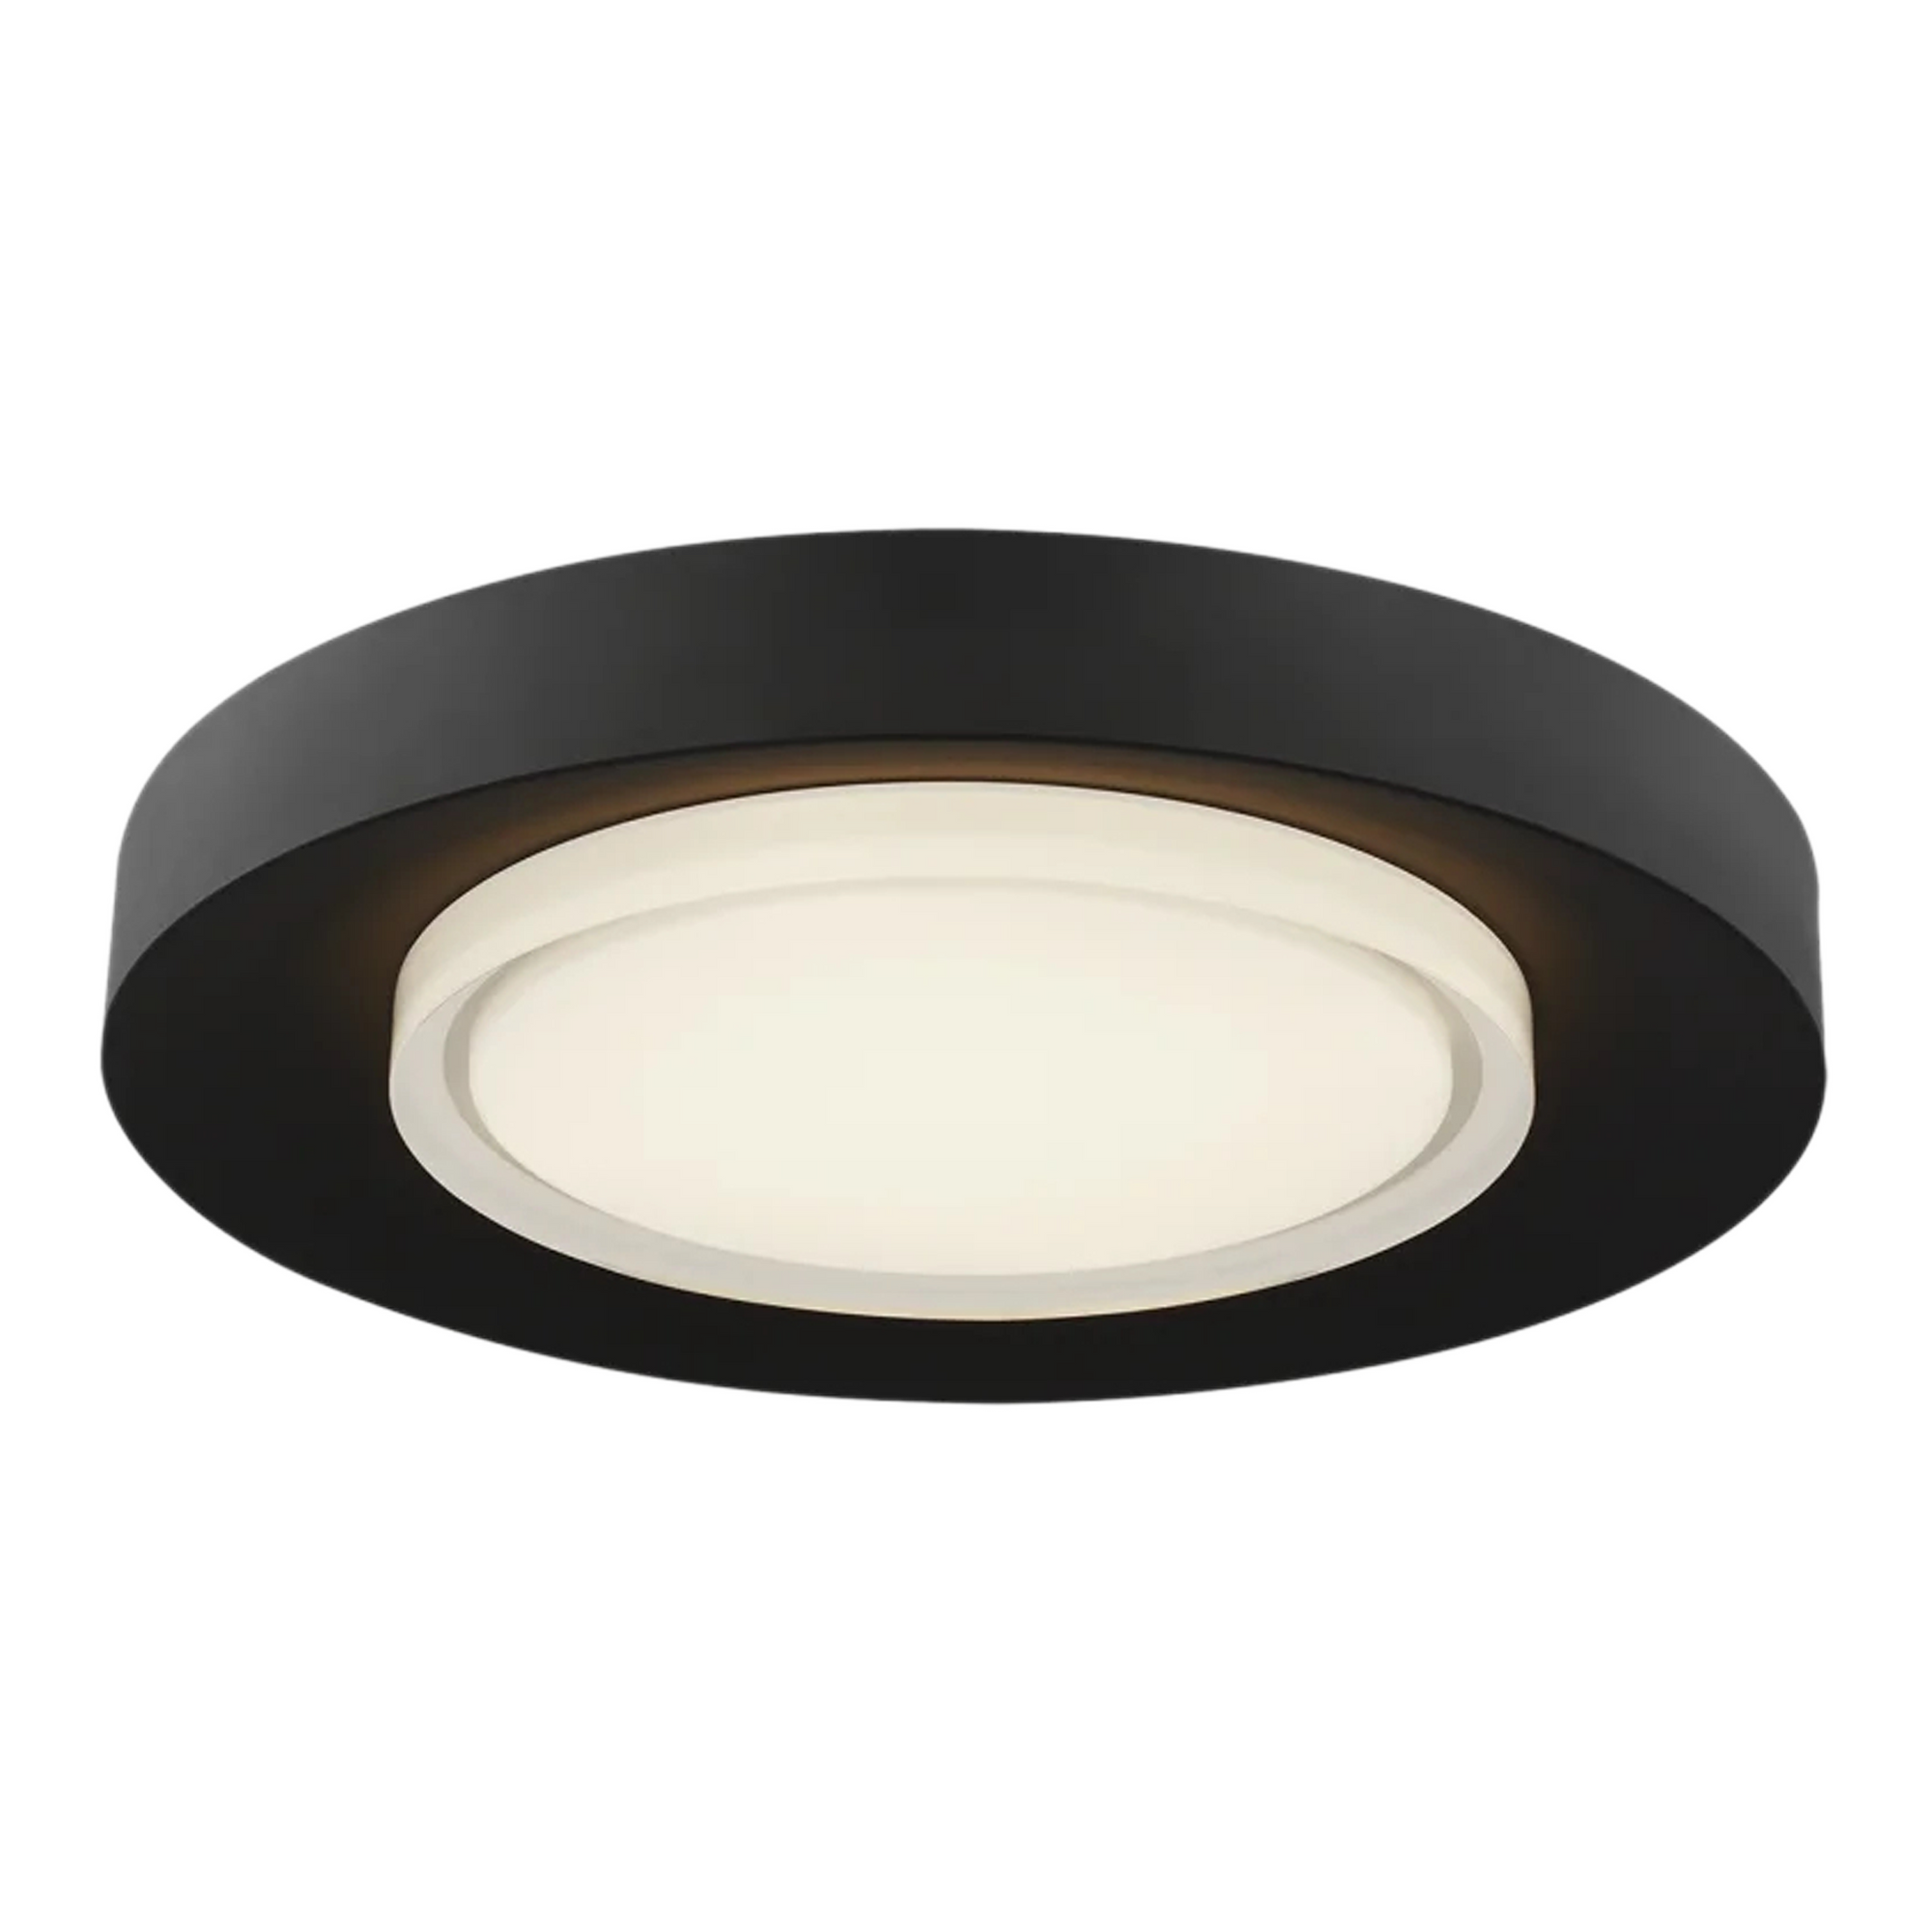 The Hilo Flush Mount brings a beautiful luminescent look to any space, with its dark body and bright white shine.